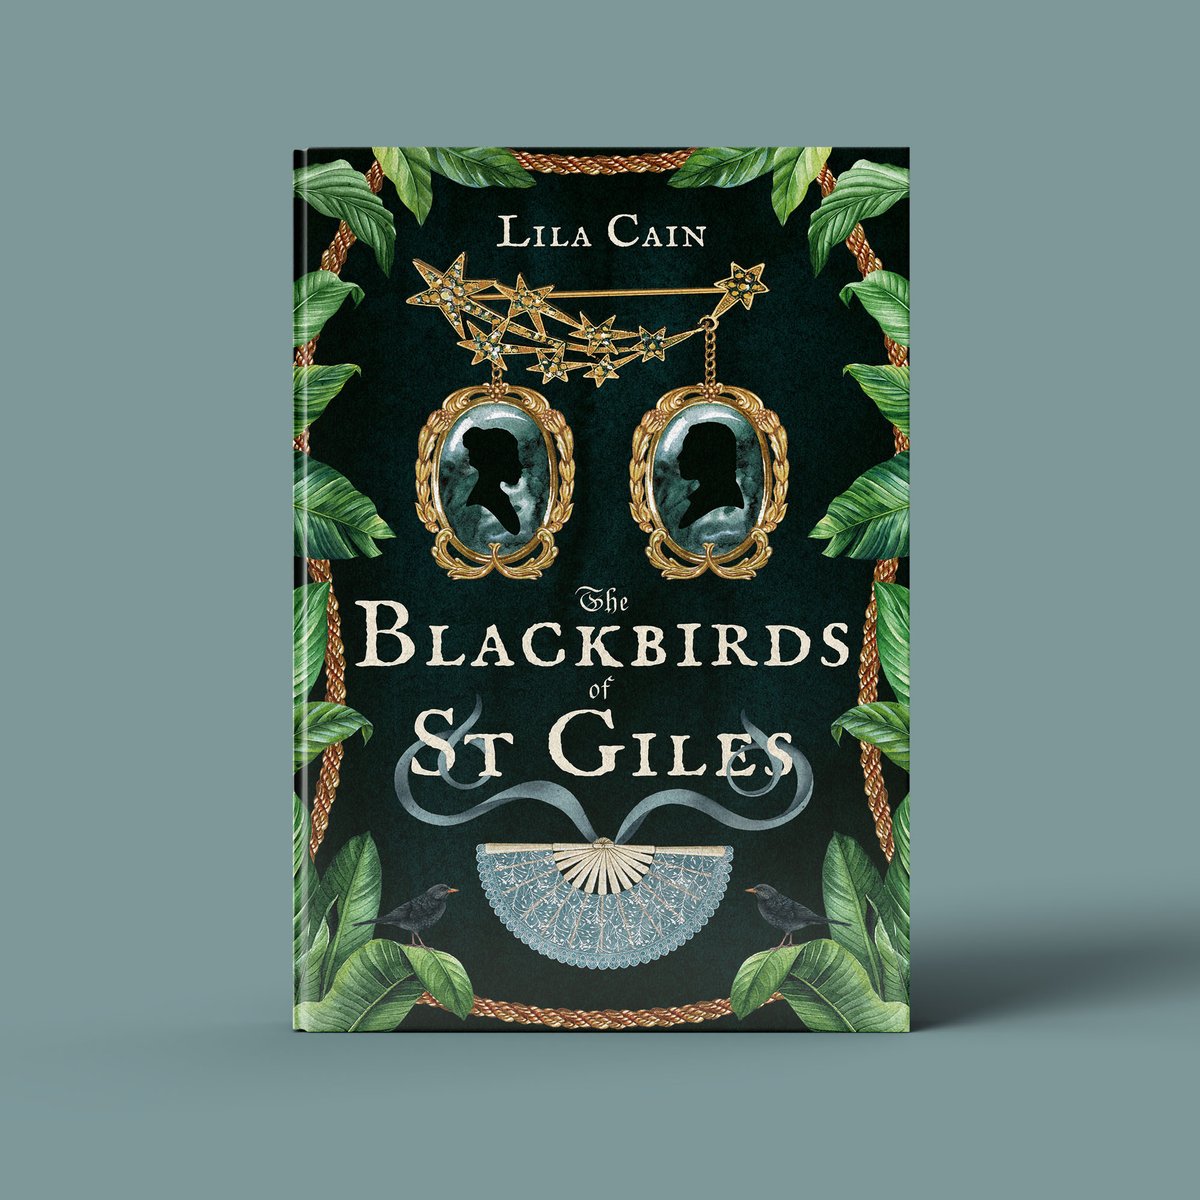 London, 1782. Some things are earned. Some things are worth fighting for... We're thrilled to share the cover for #TheBlackbirdsofStGiles by Lila Cain – out January 2025 from @Marciathewriter and @KateAGriffin and available to pre-order now. bit.ly/3UQs0ZN